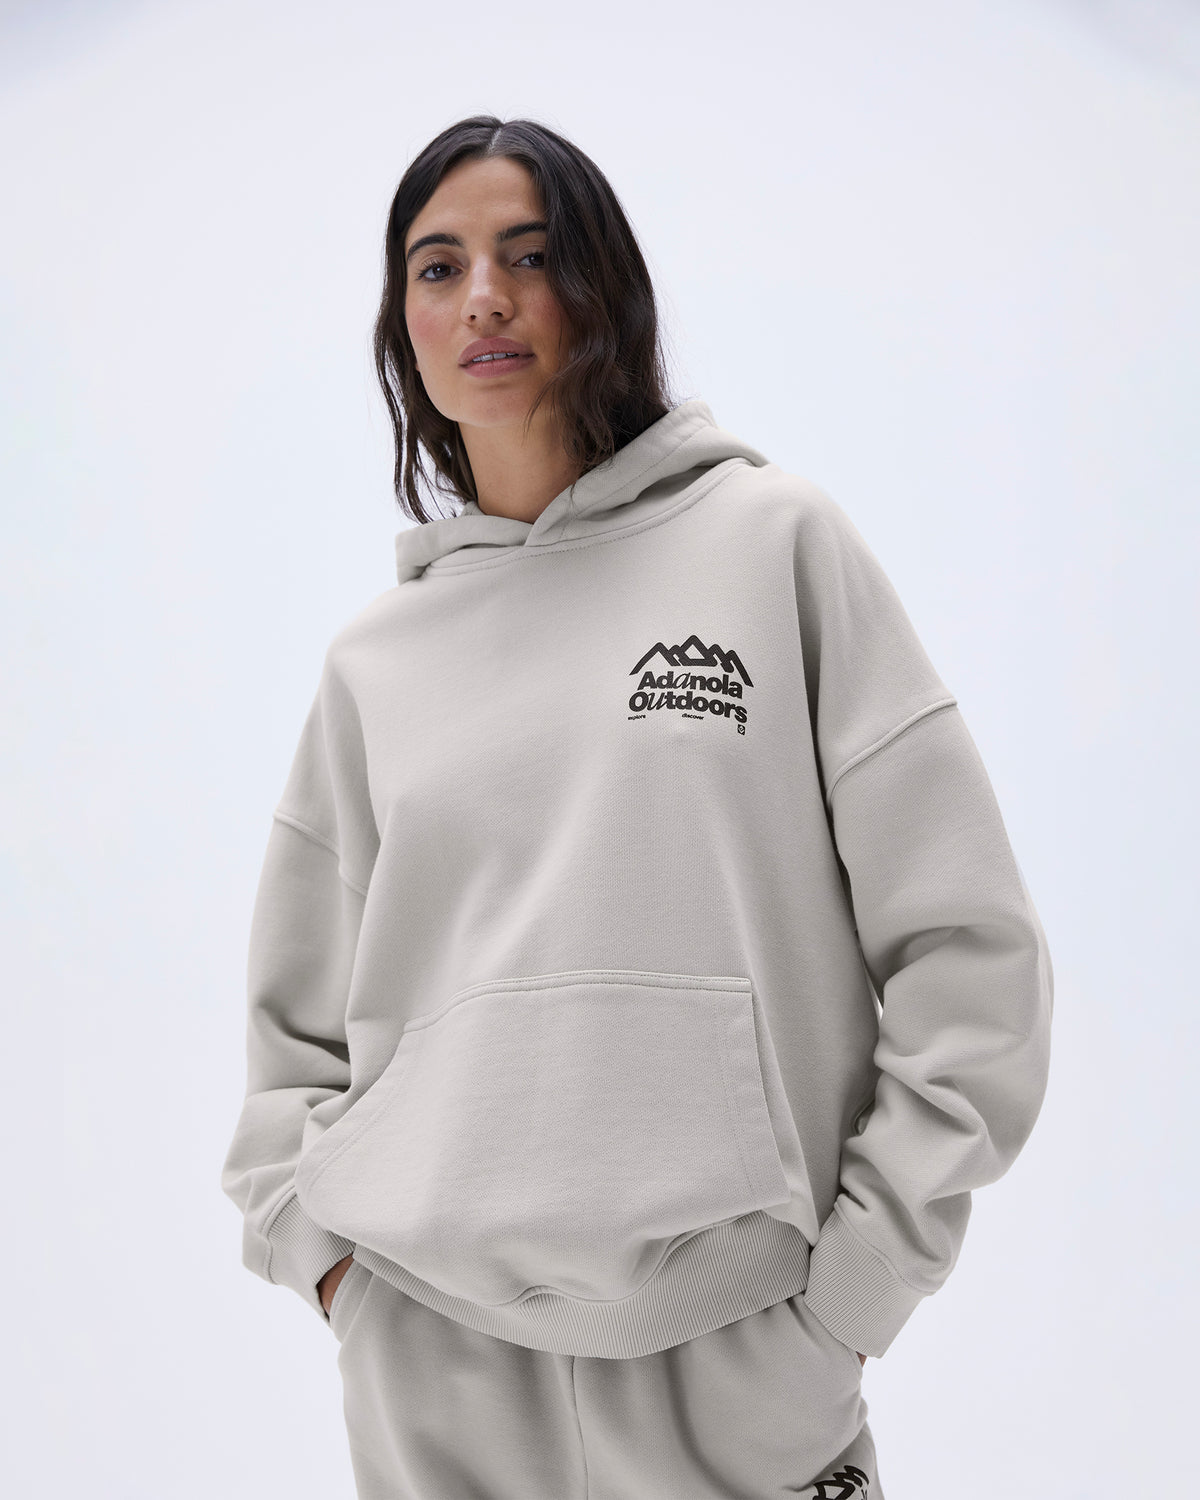 Discover Washed Oversized Hoodie - Stone